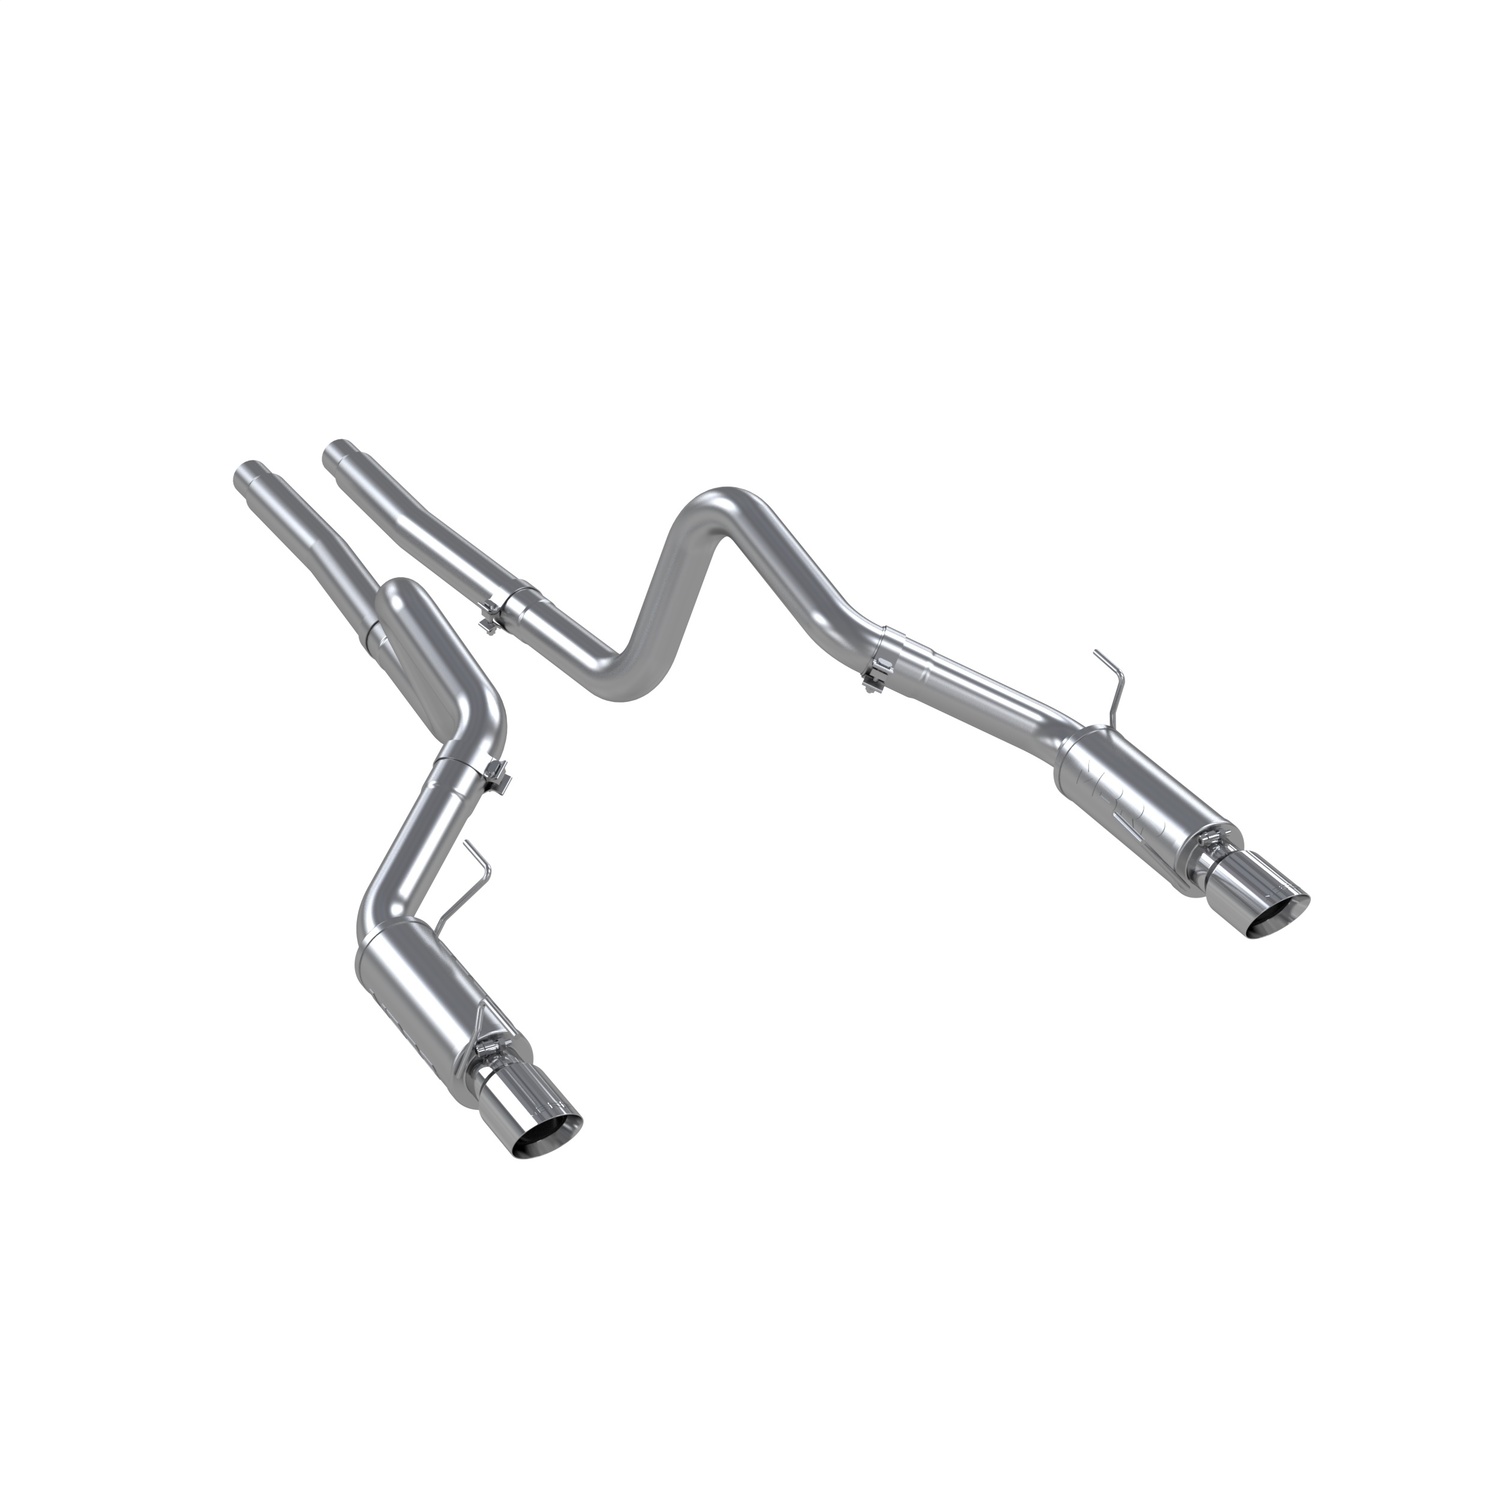 MBRP Exhaust S7270AL Armor Lite Cat Back Exhaust System Fits 05-10 Mustang